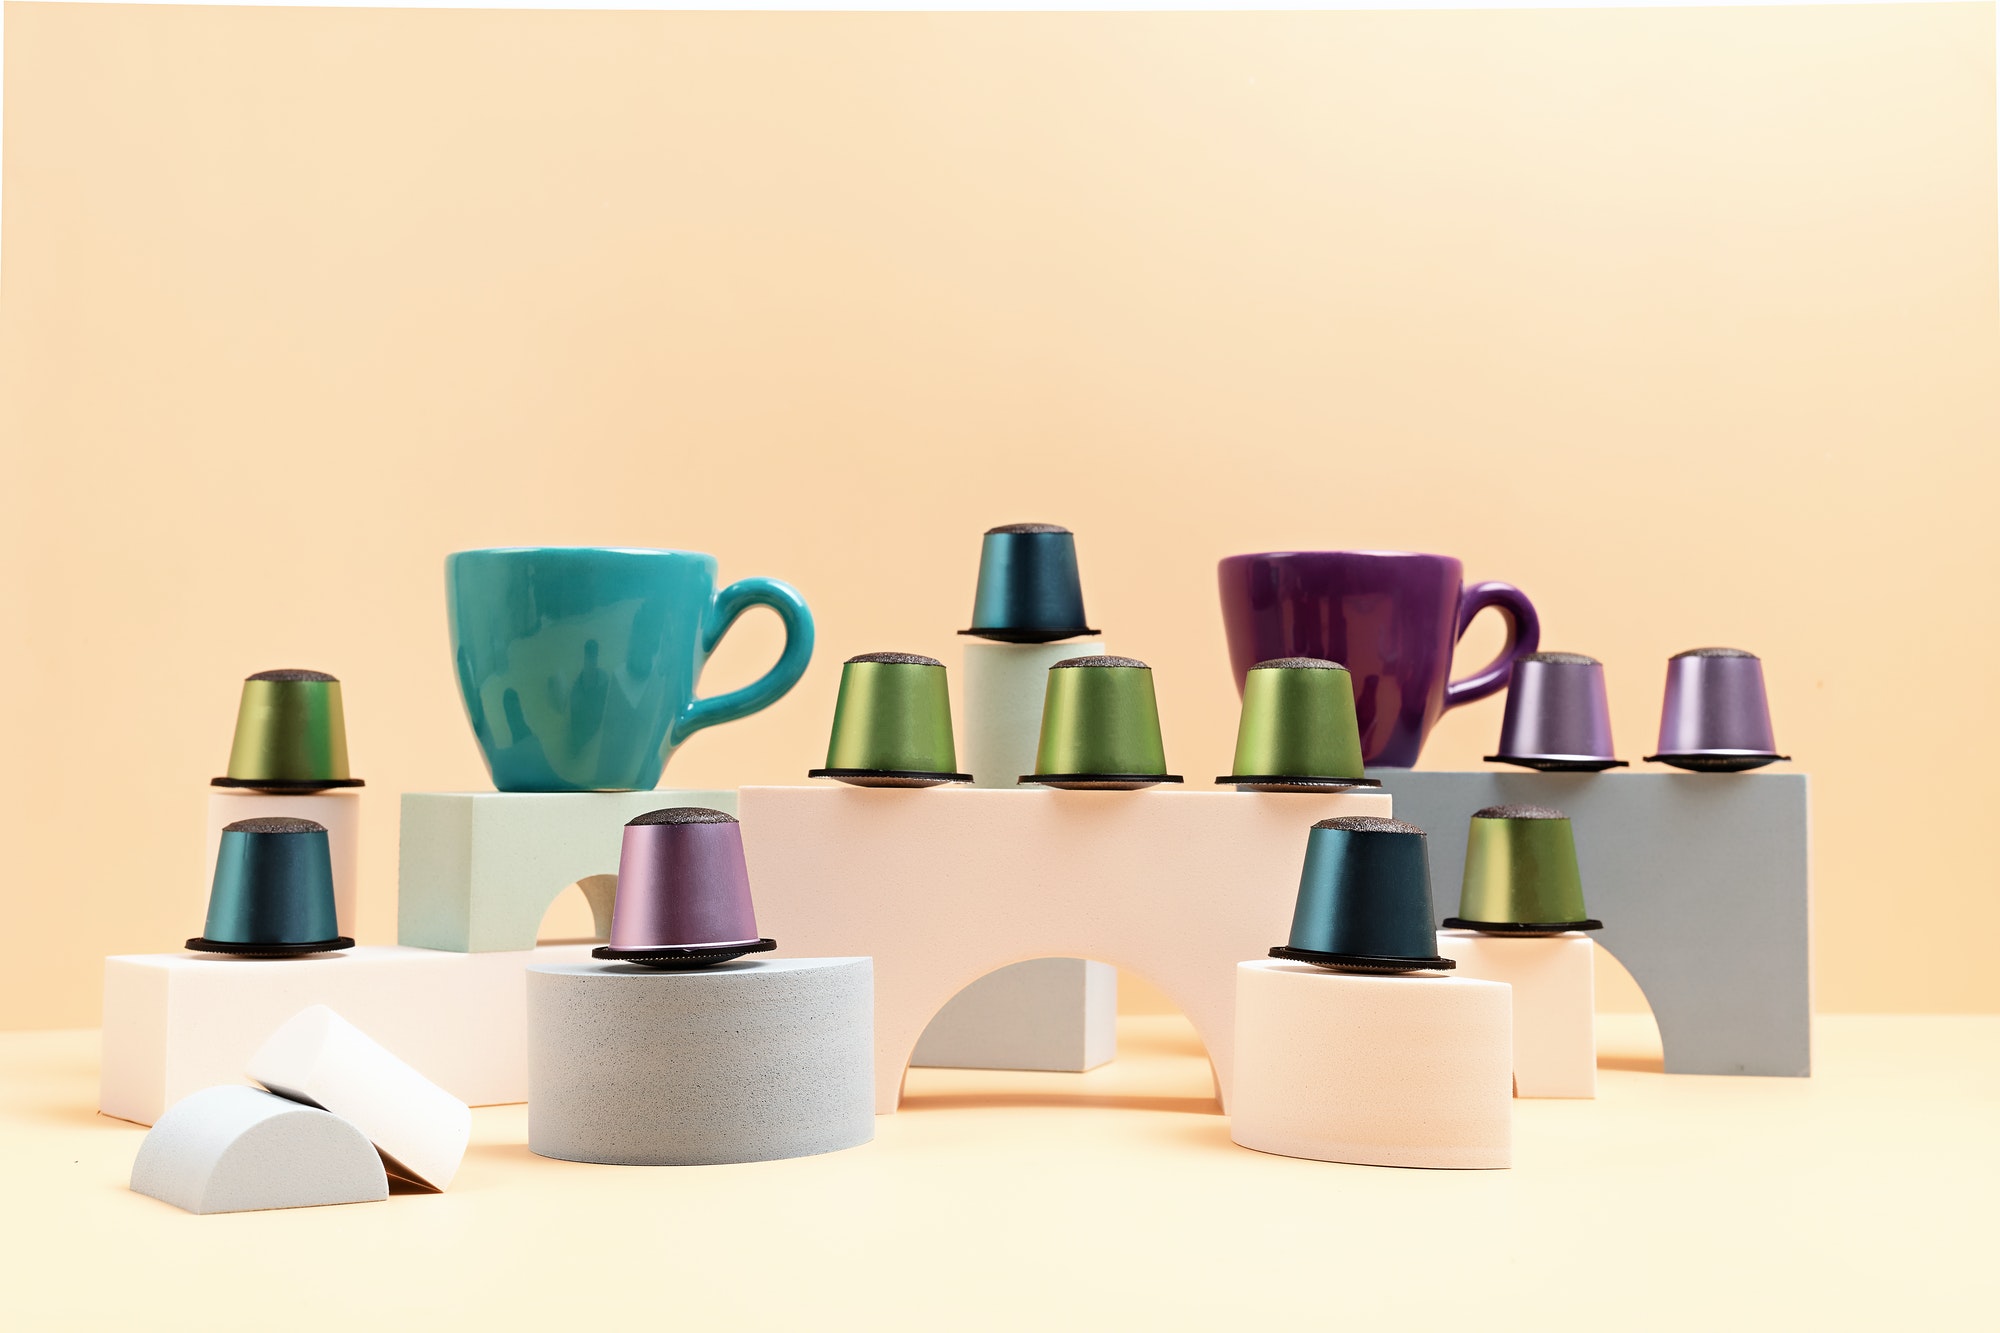 Disposable coffee capsules and cup over green background with copy space on podiums. Morning dose of